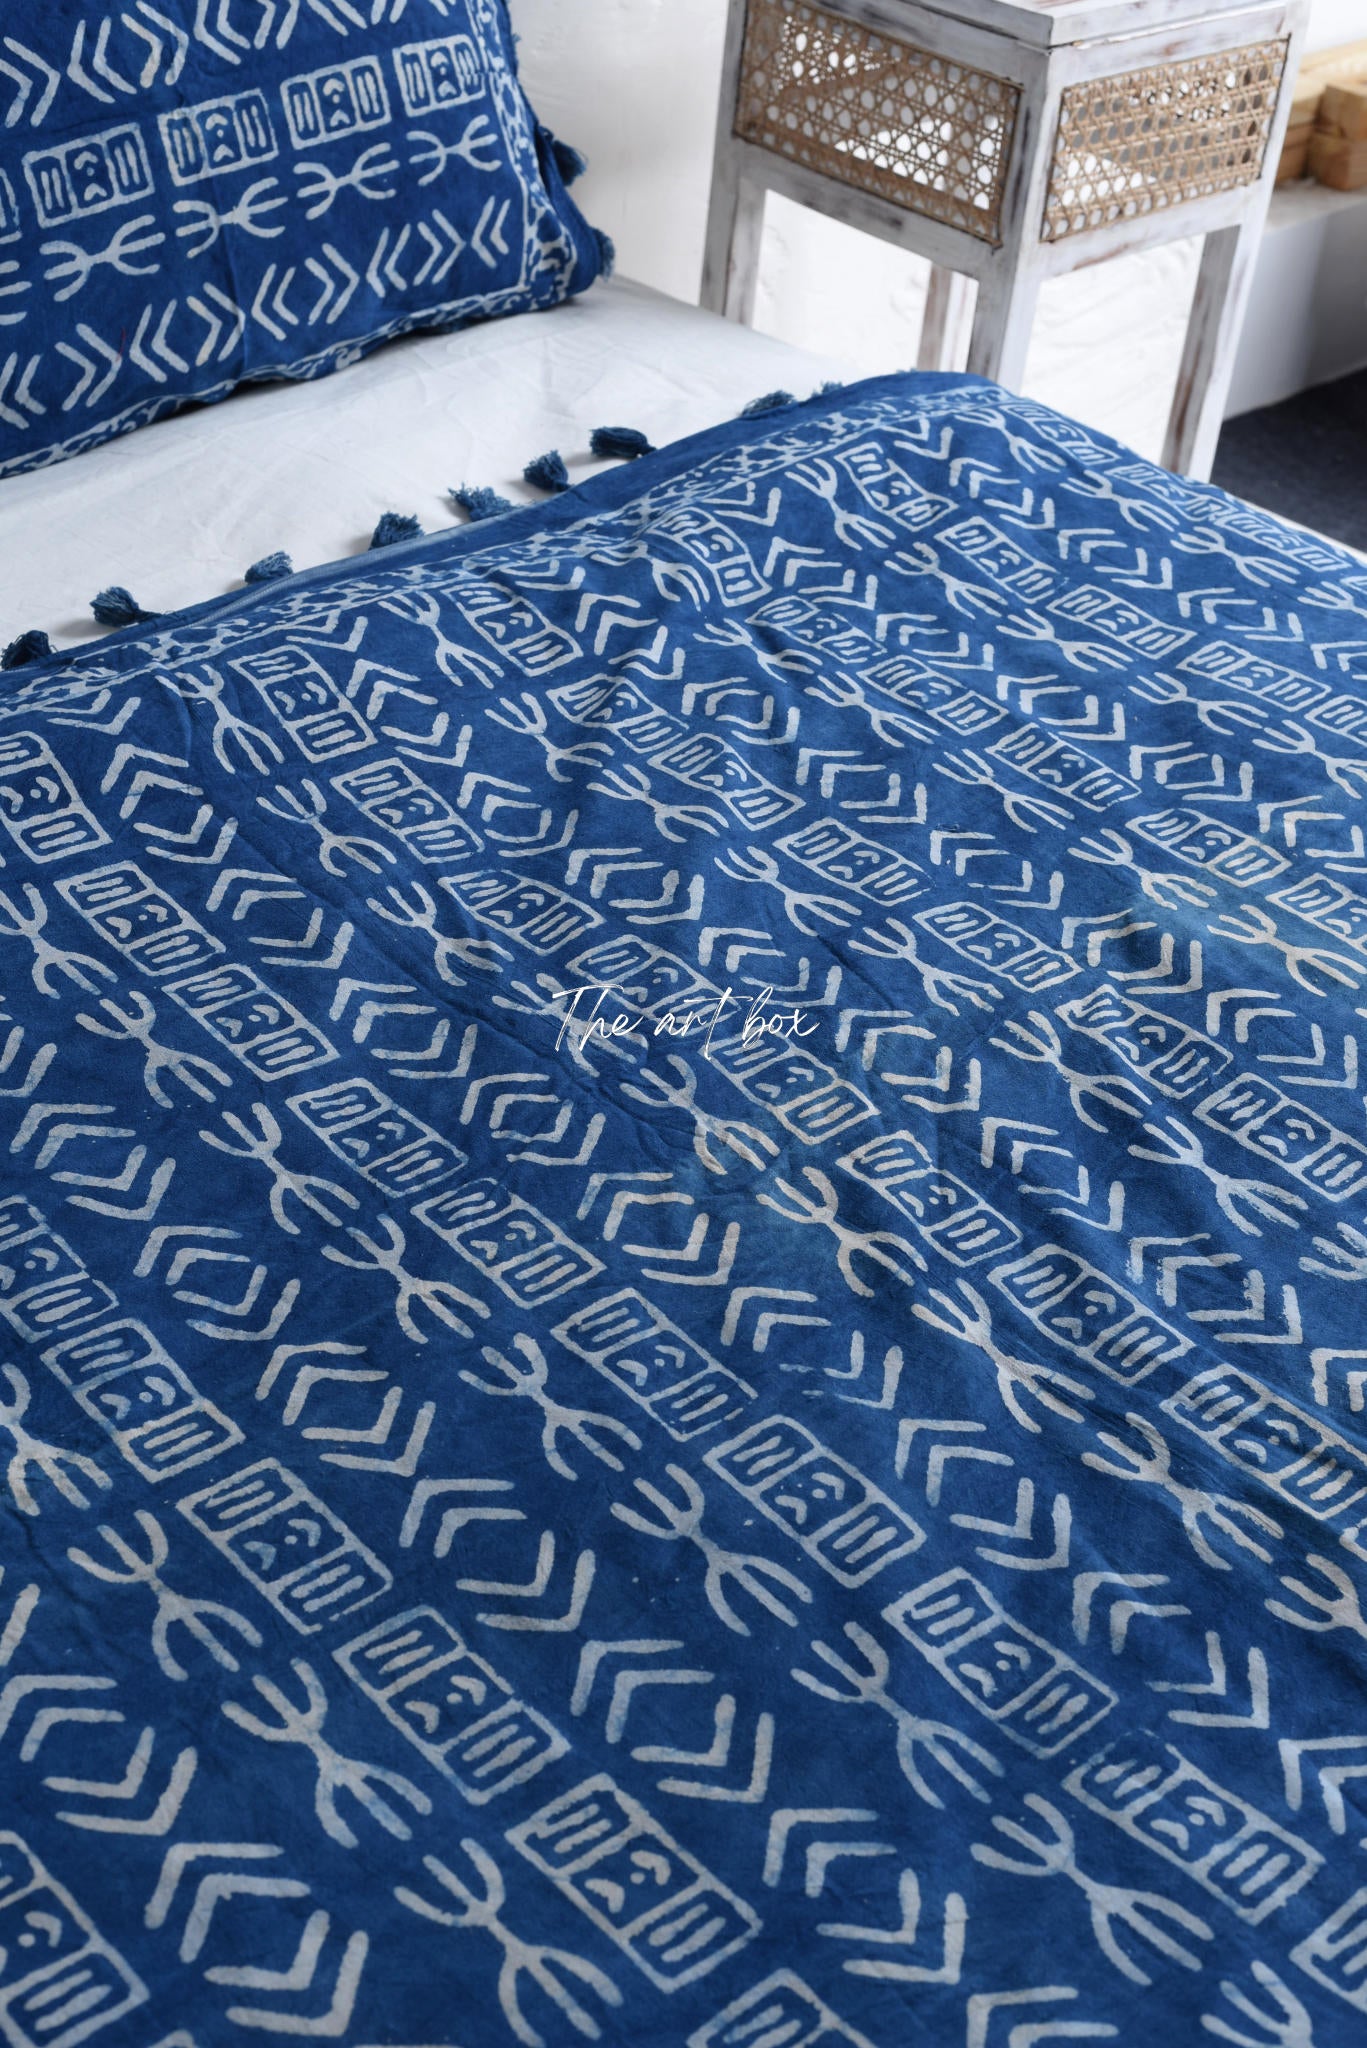 Mud Cloth Luxury Block Printed Duvet Cover and Pillow Set